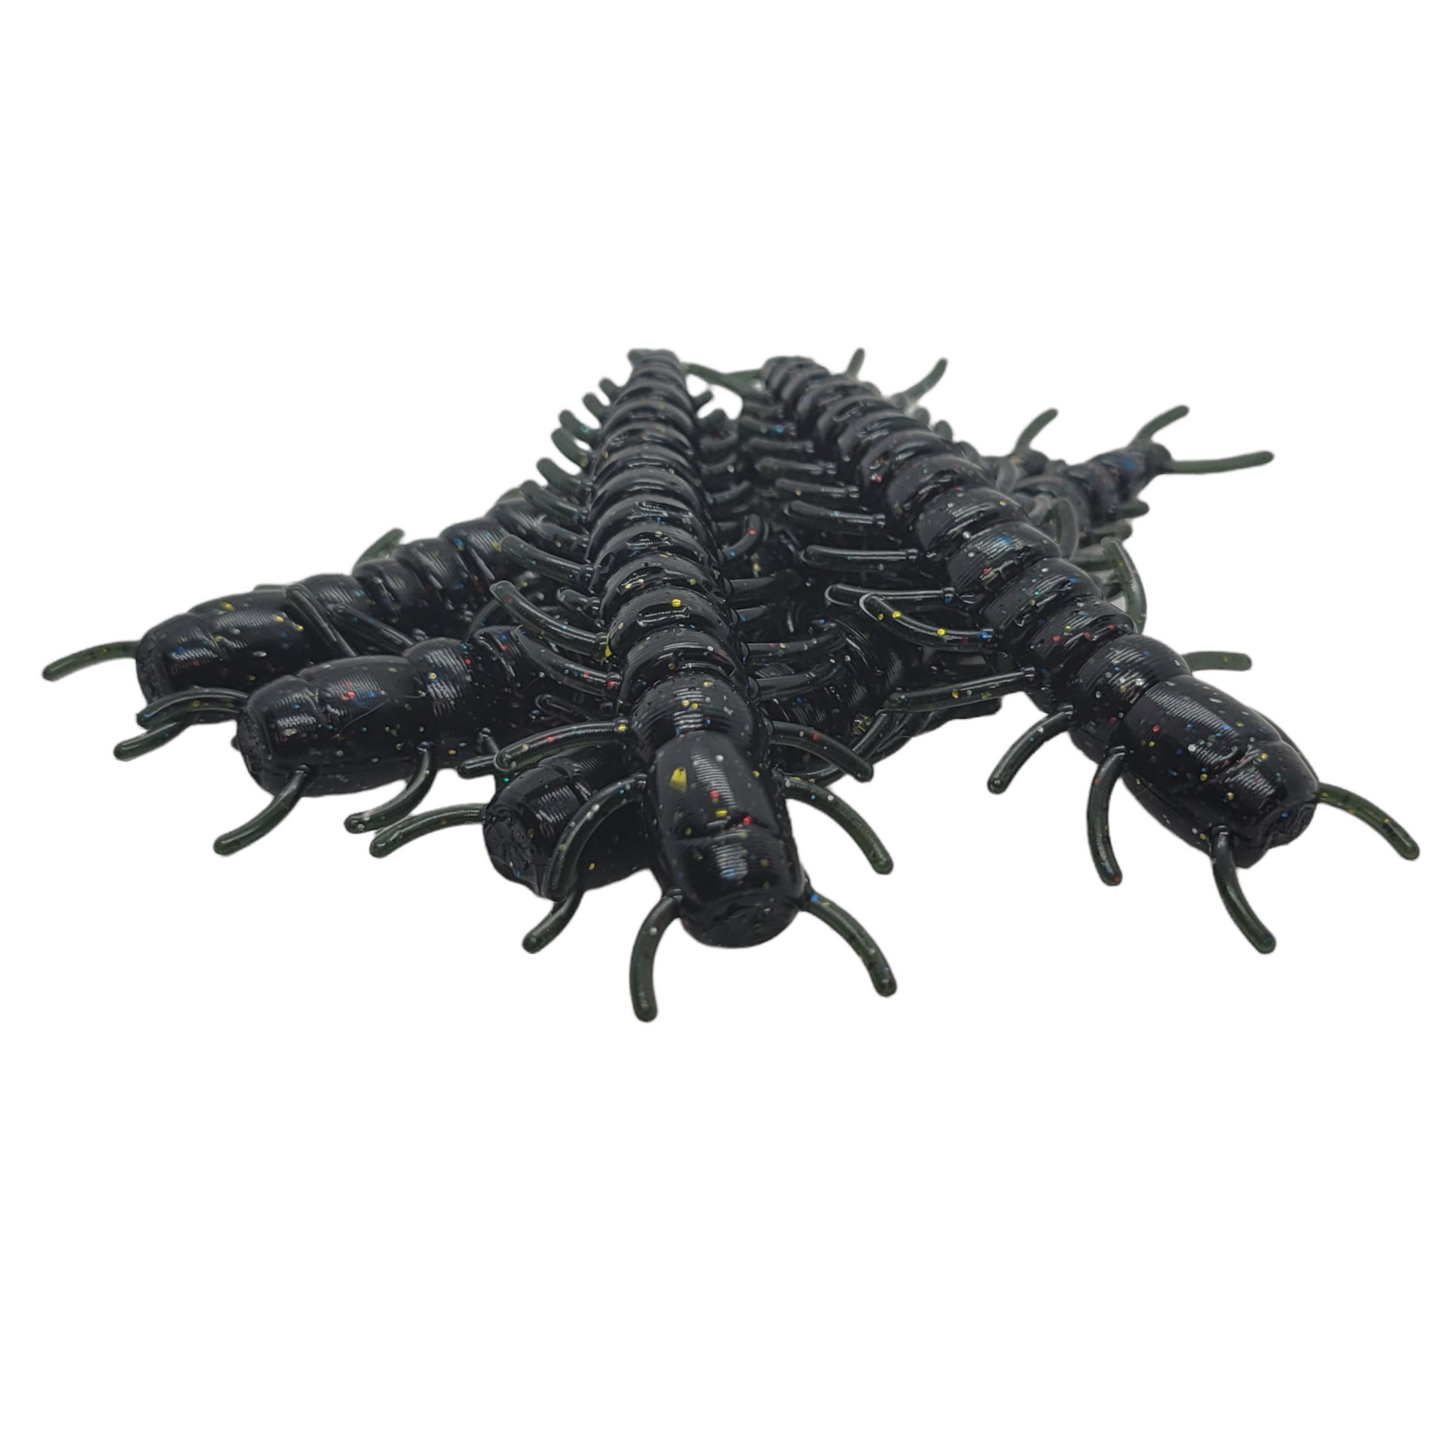  6 Floating Hellgrammite - Qty 5/Pack (Black and Blue